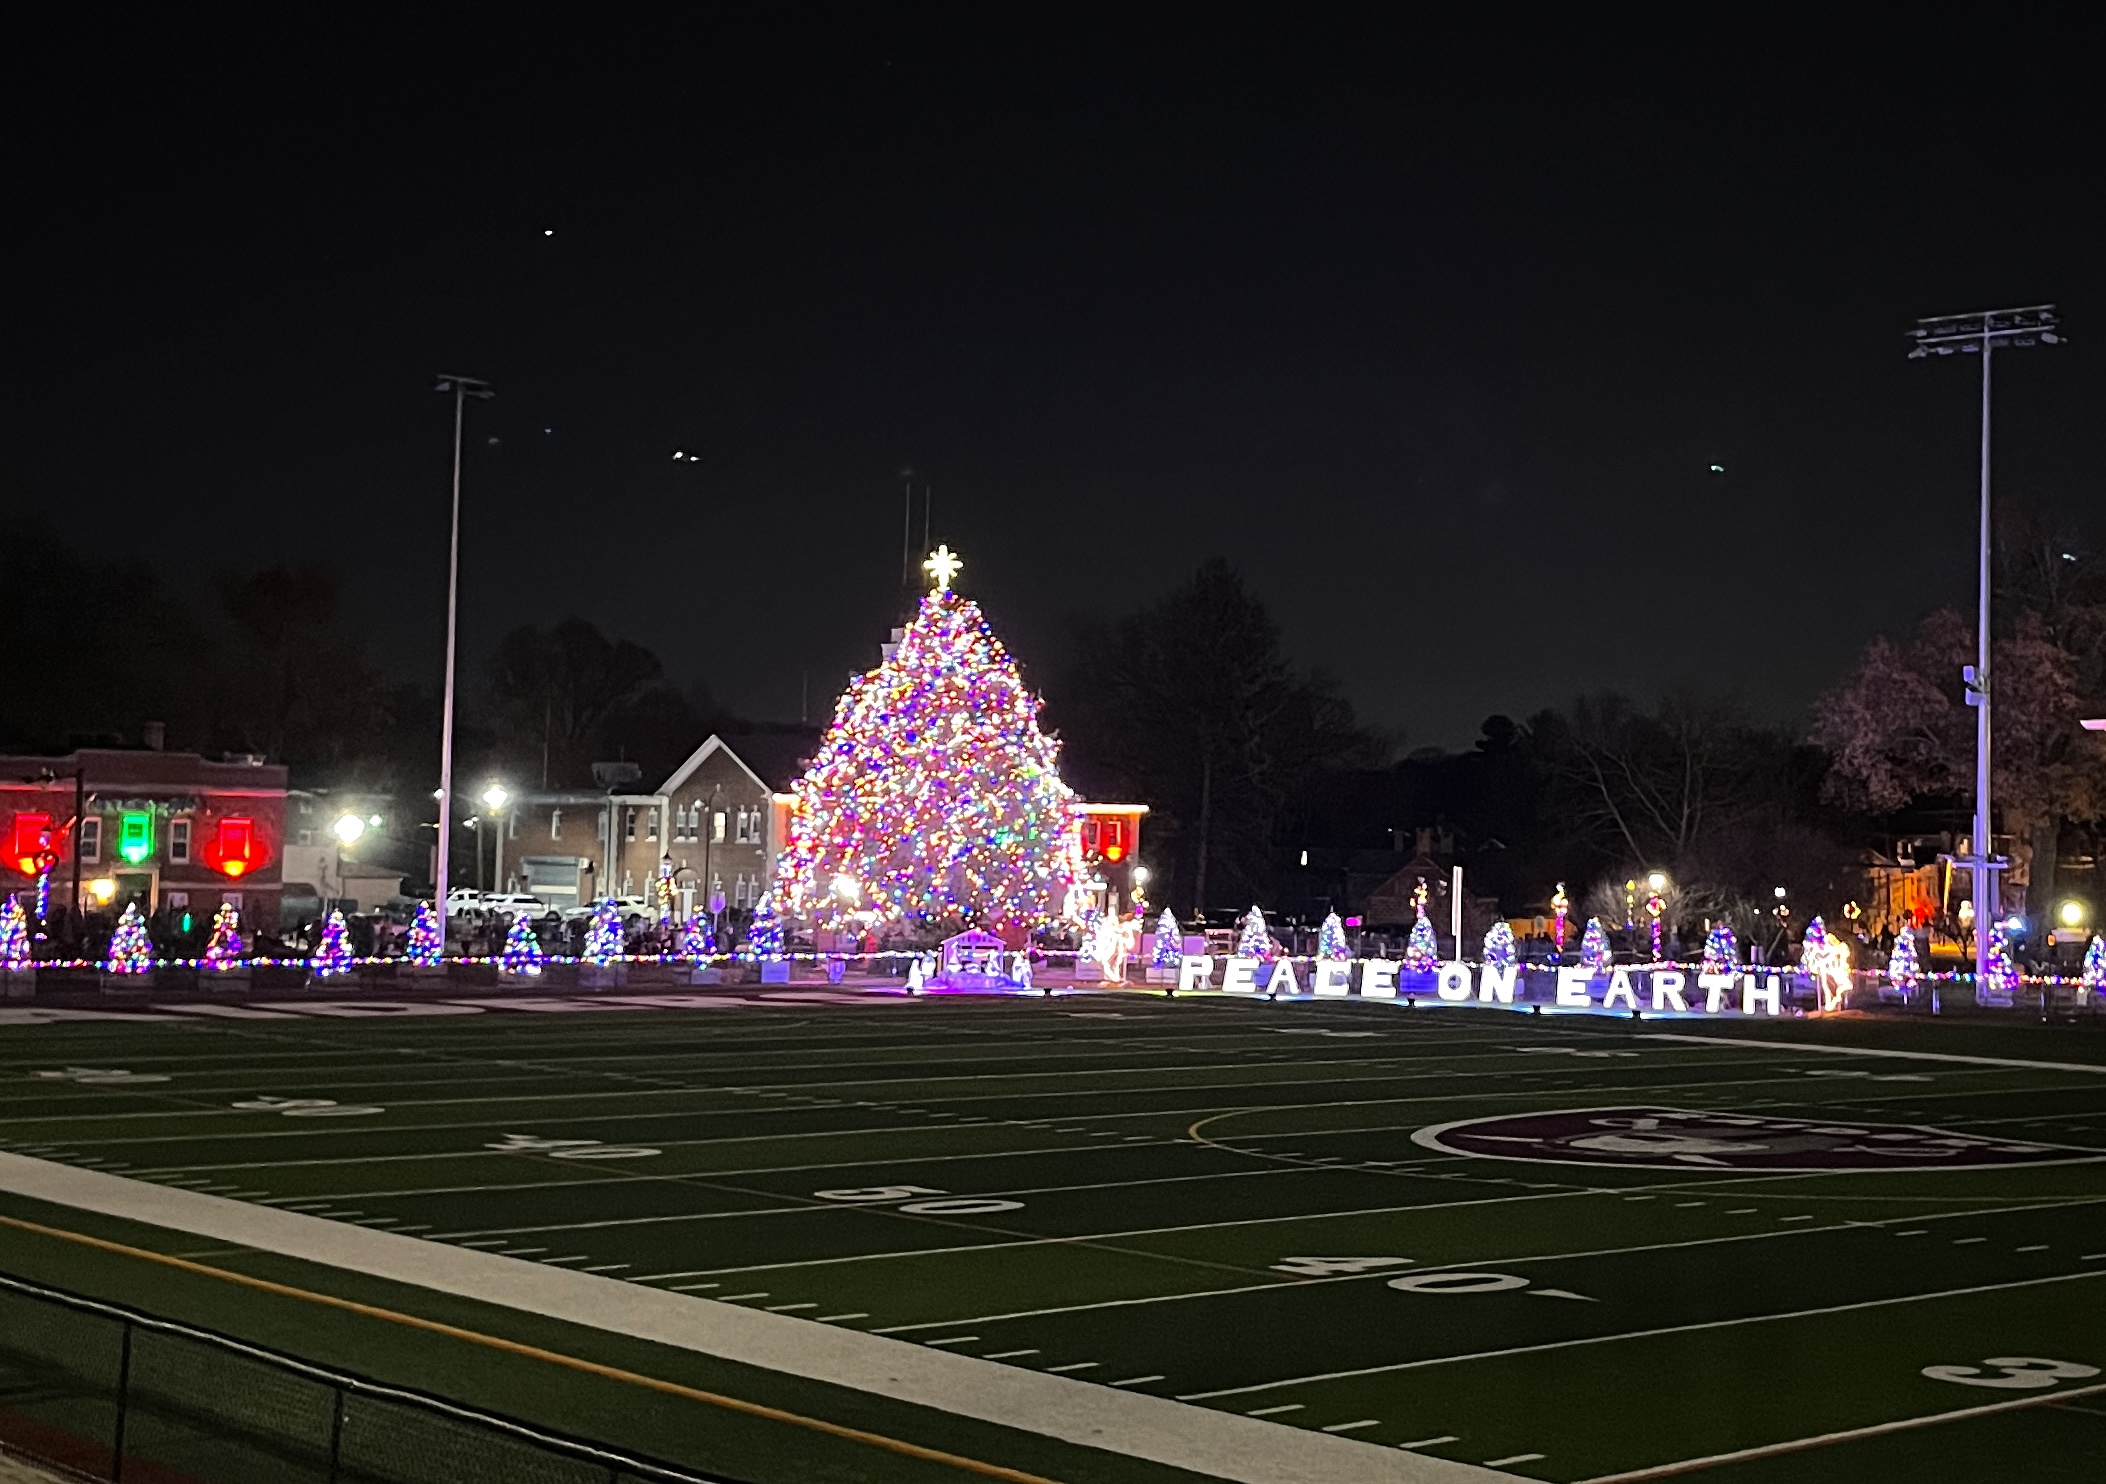 Nutley's 60 foot christmas tree filled up with light, "Peace on Earth" sign lit beside it